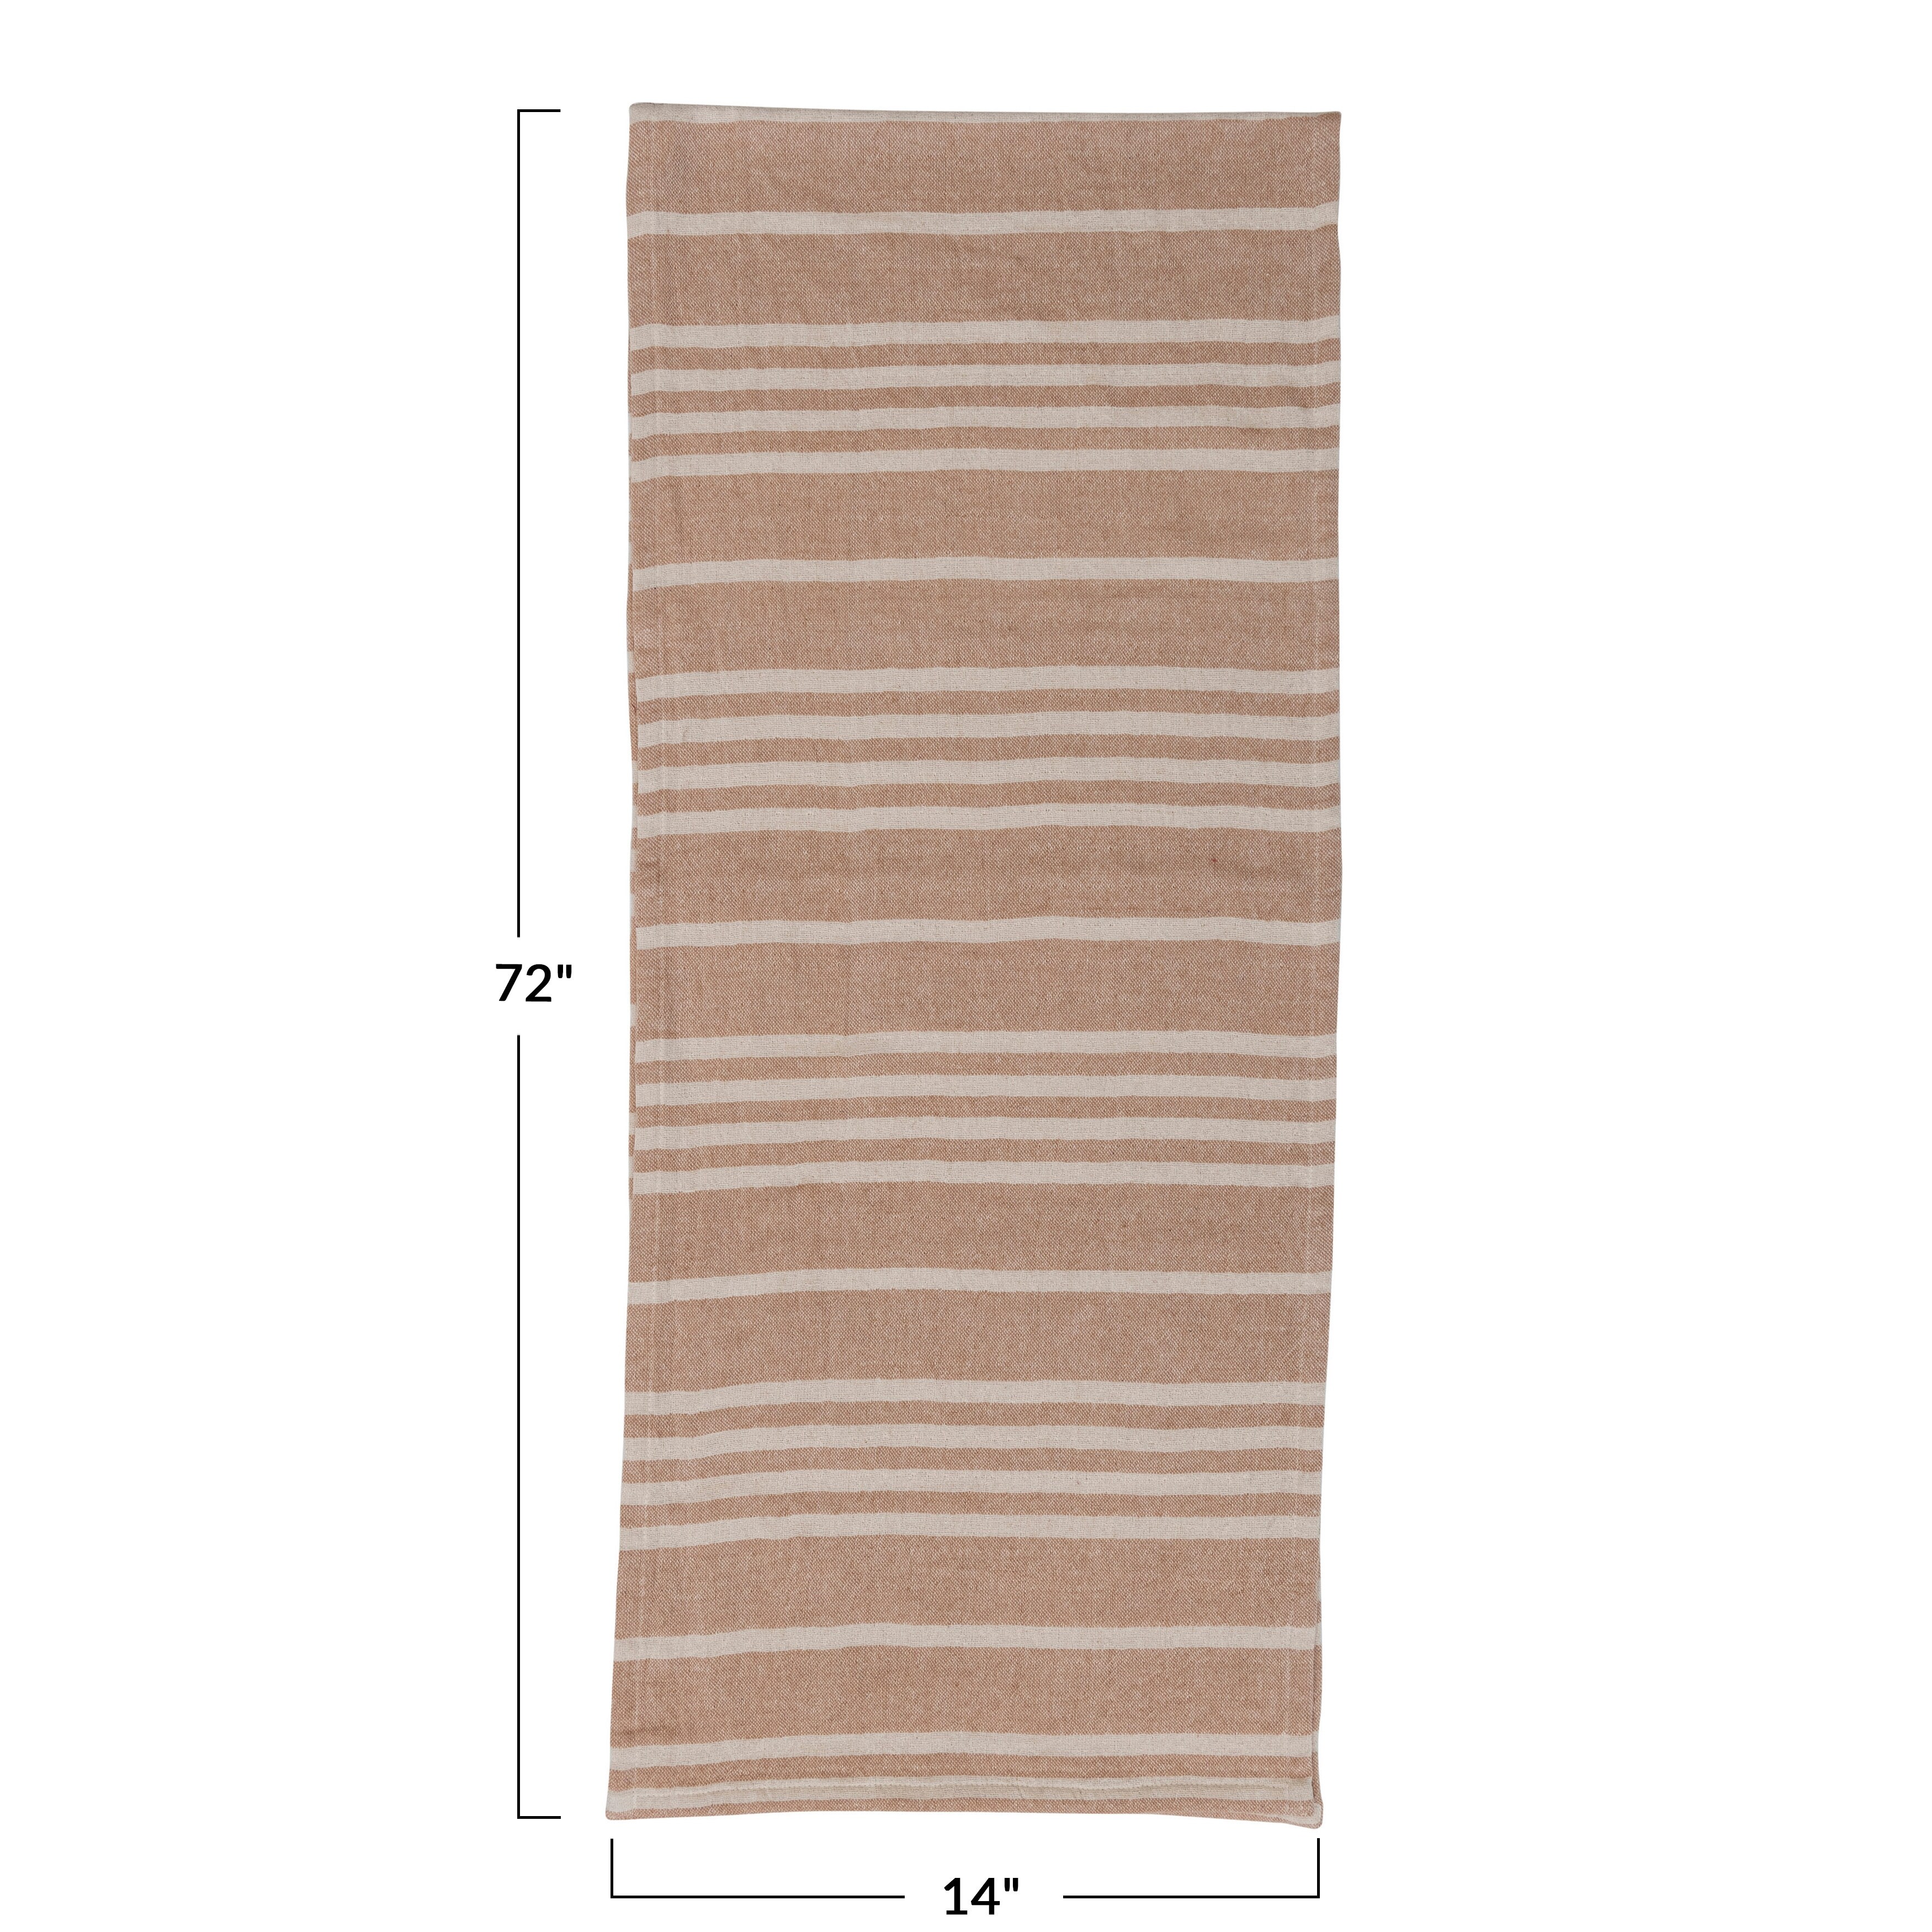 Cotton Double Cloth Table Runner with Stripes - 72.0"L x 14.0"W x 0.3"H